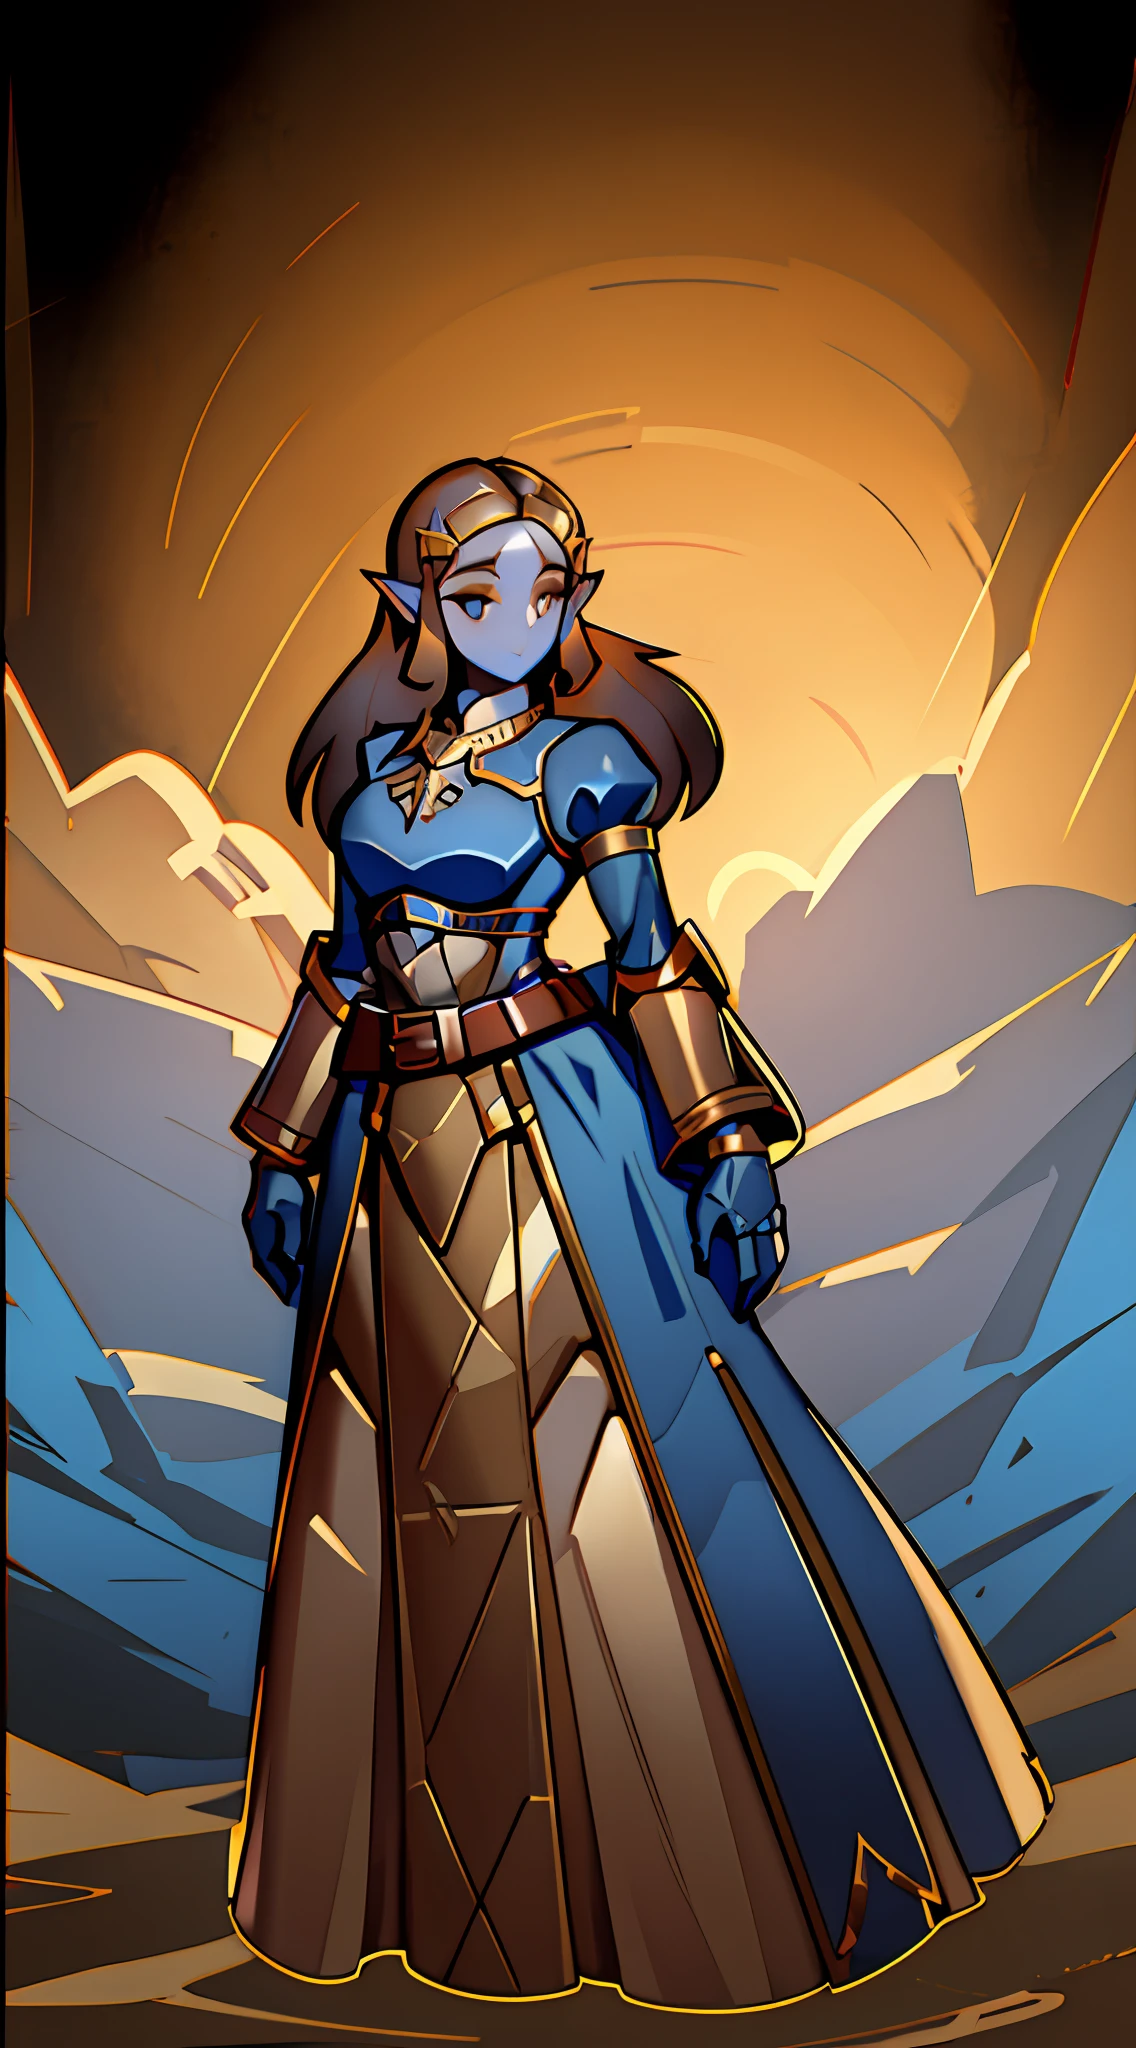 Botw Zelda wearing Heavy knight armor, Botw Themed Knight armor, Royal blue and gold armor, thick armor plating, Gold accents with brown straps, brown belt with gold accents, Heavy Blue armor, Armored dress, Large knight armor, form-fitting knight armor, helmetless, helmet held in arm, wearing princess tiara, Botw Zelda looking at camera